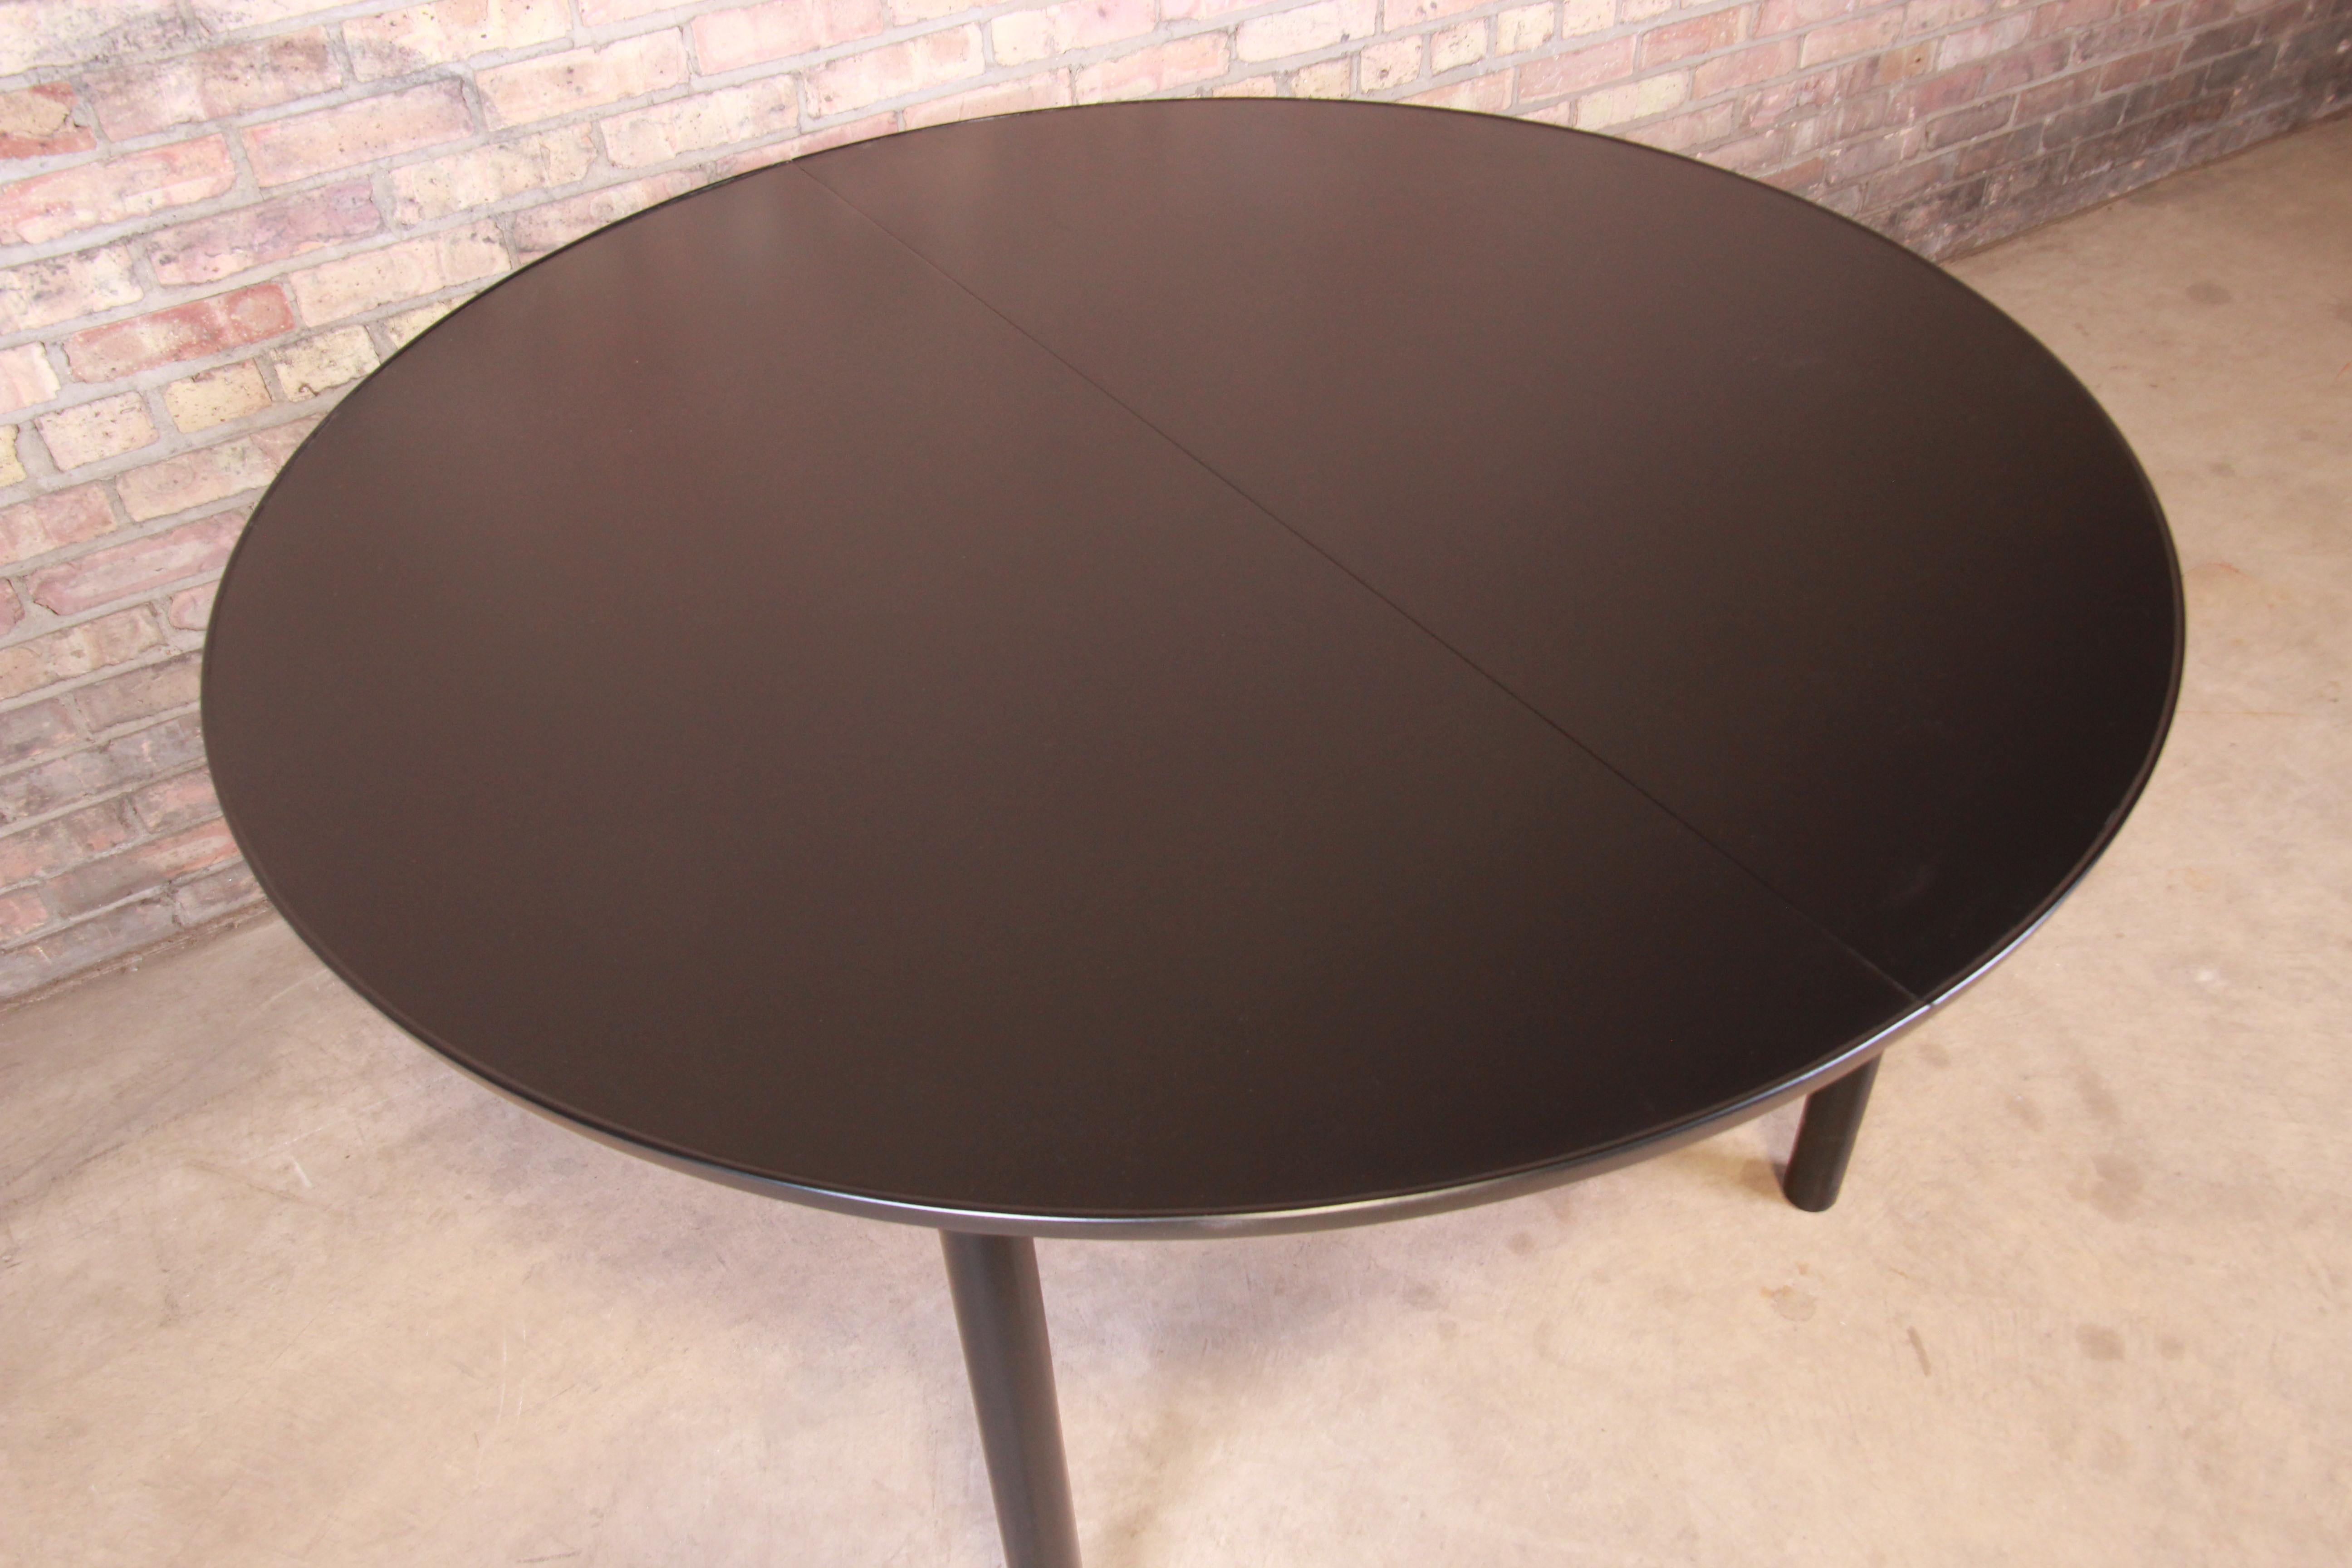 Mid-20th Century Early Edward Wormley for Dunbar Ebonized Extension Dining Table, Newly Restored